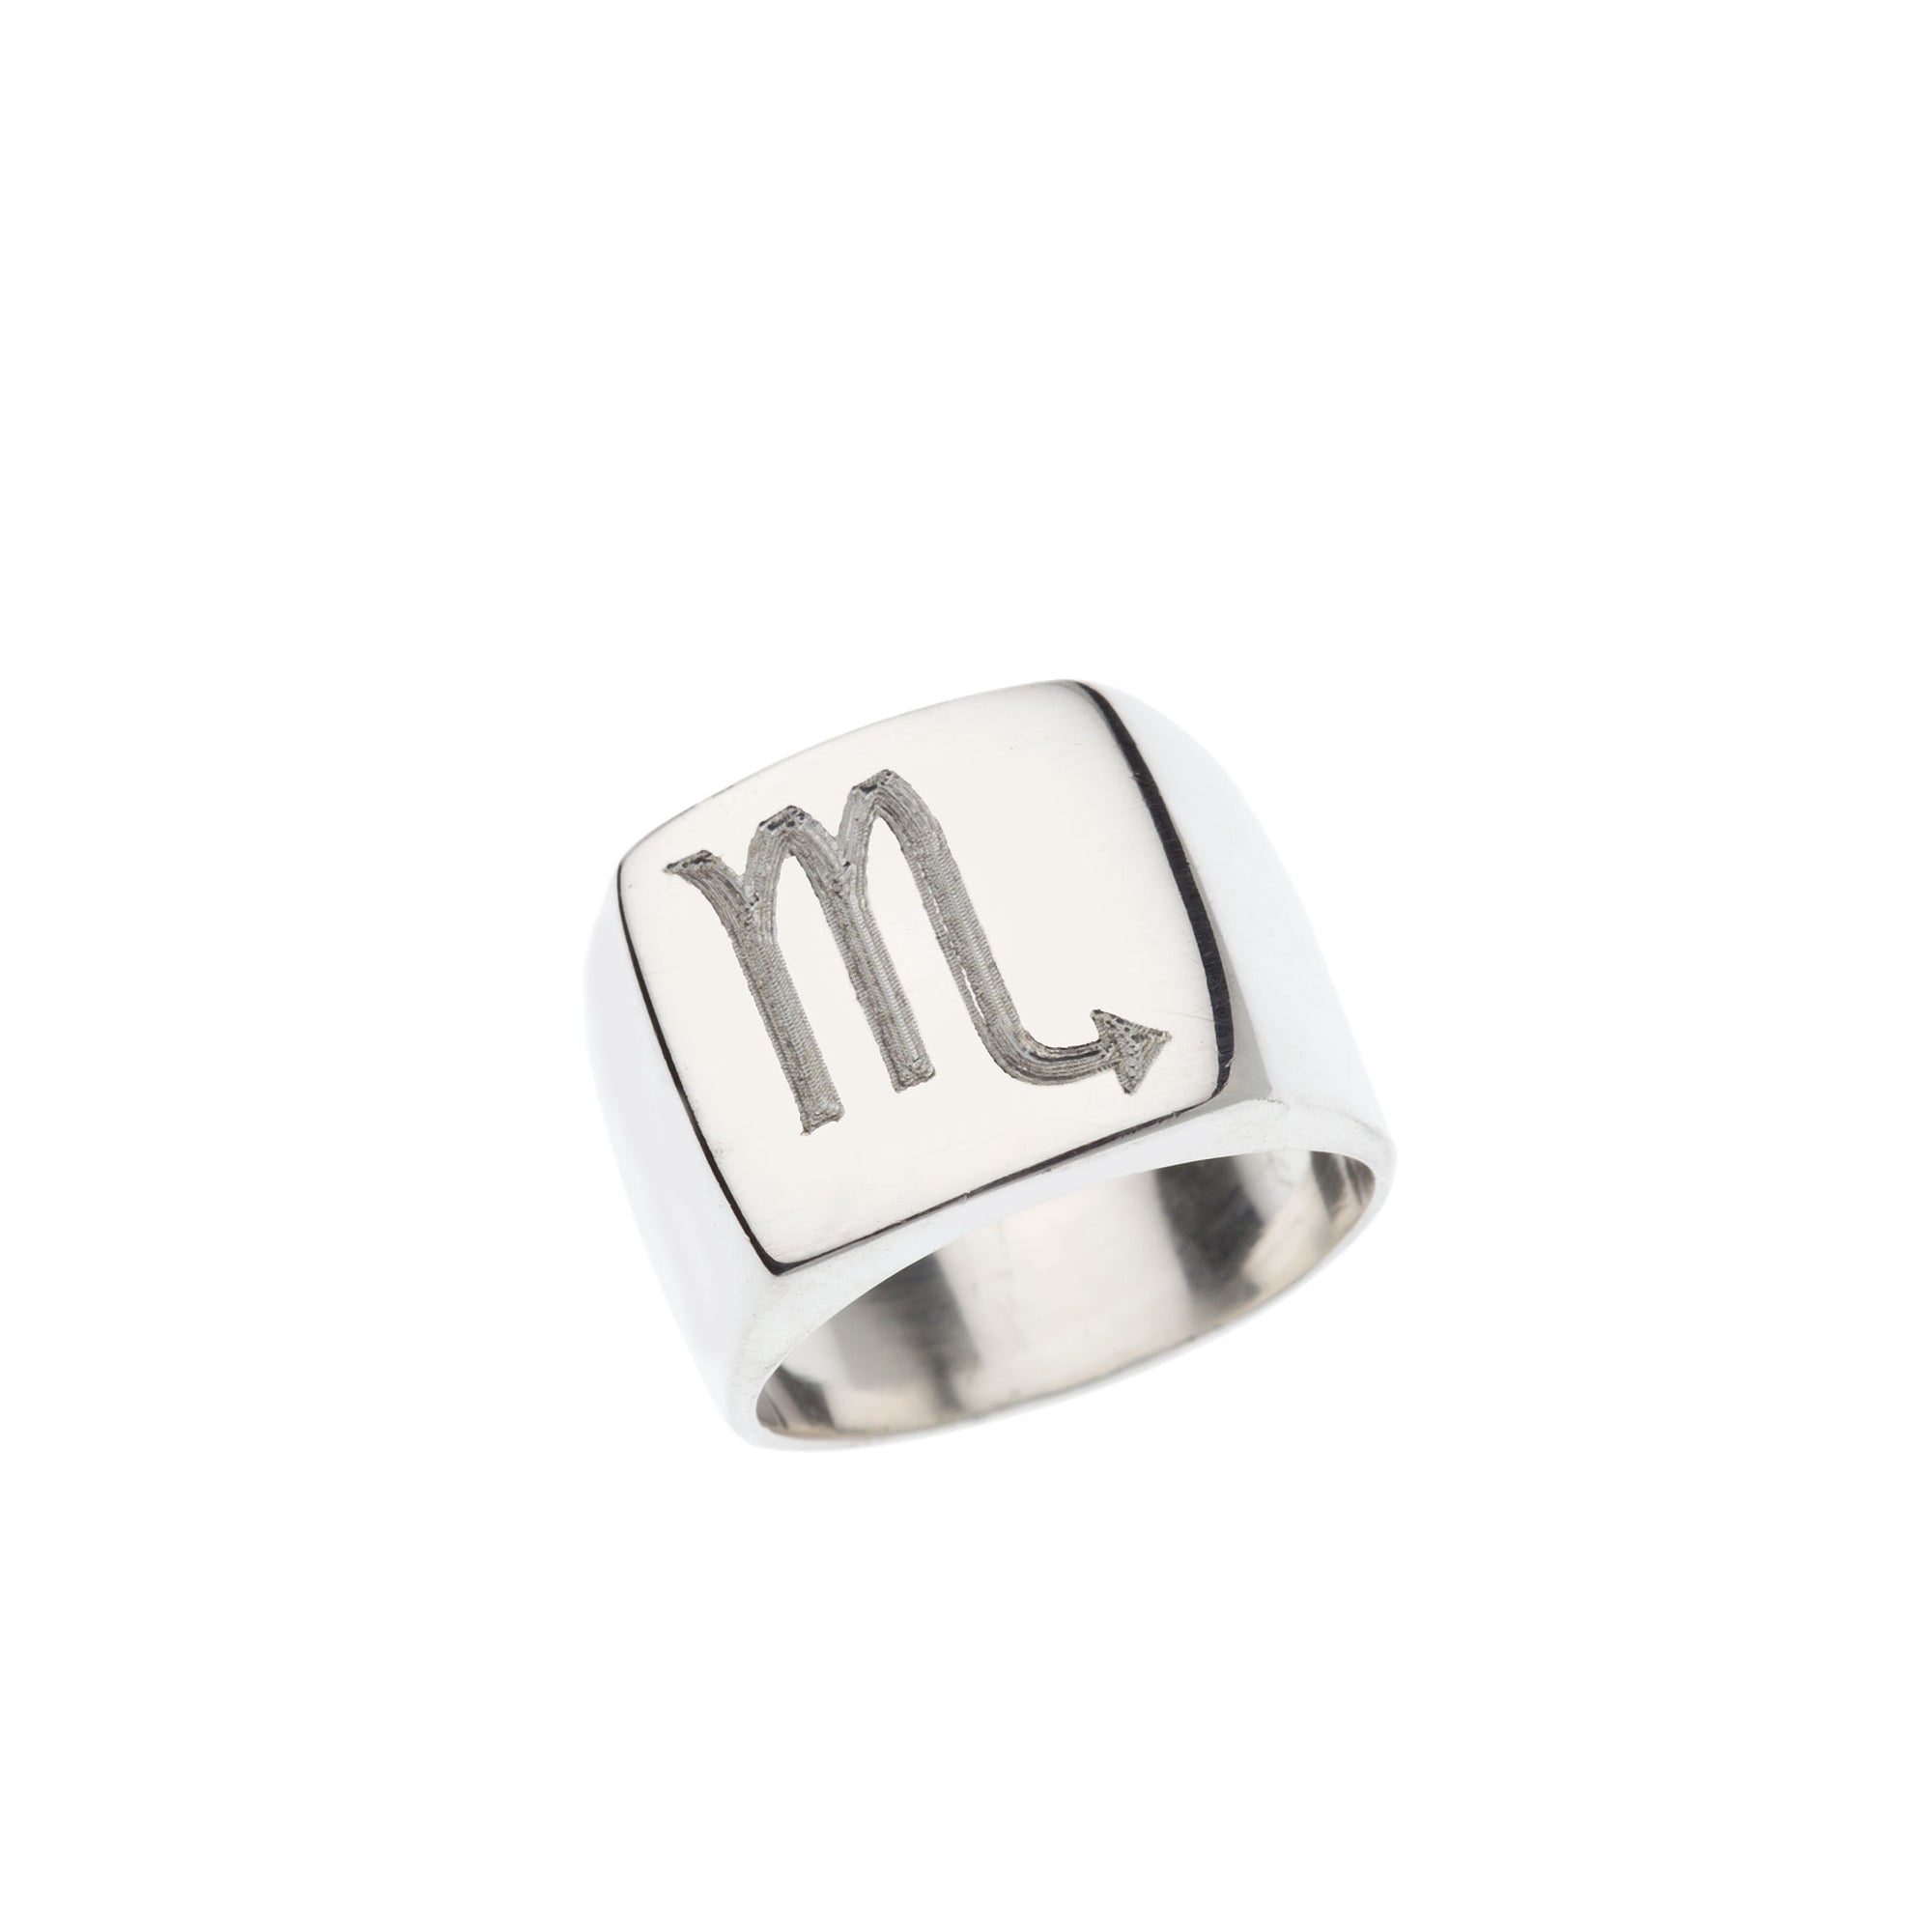 Square silver signet ring with engraved Scorpio symbol.